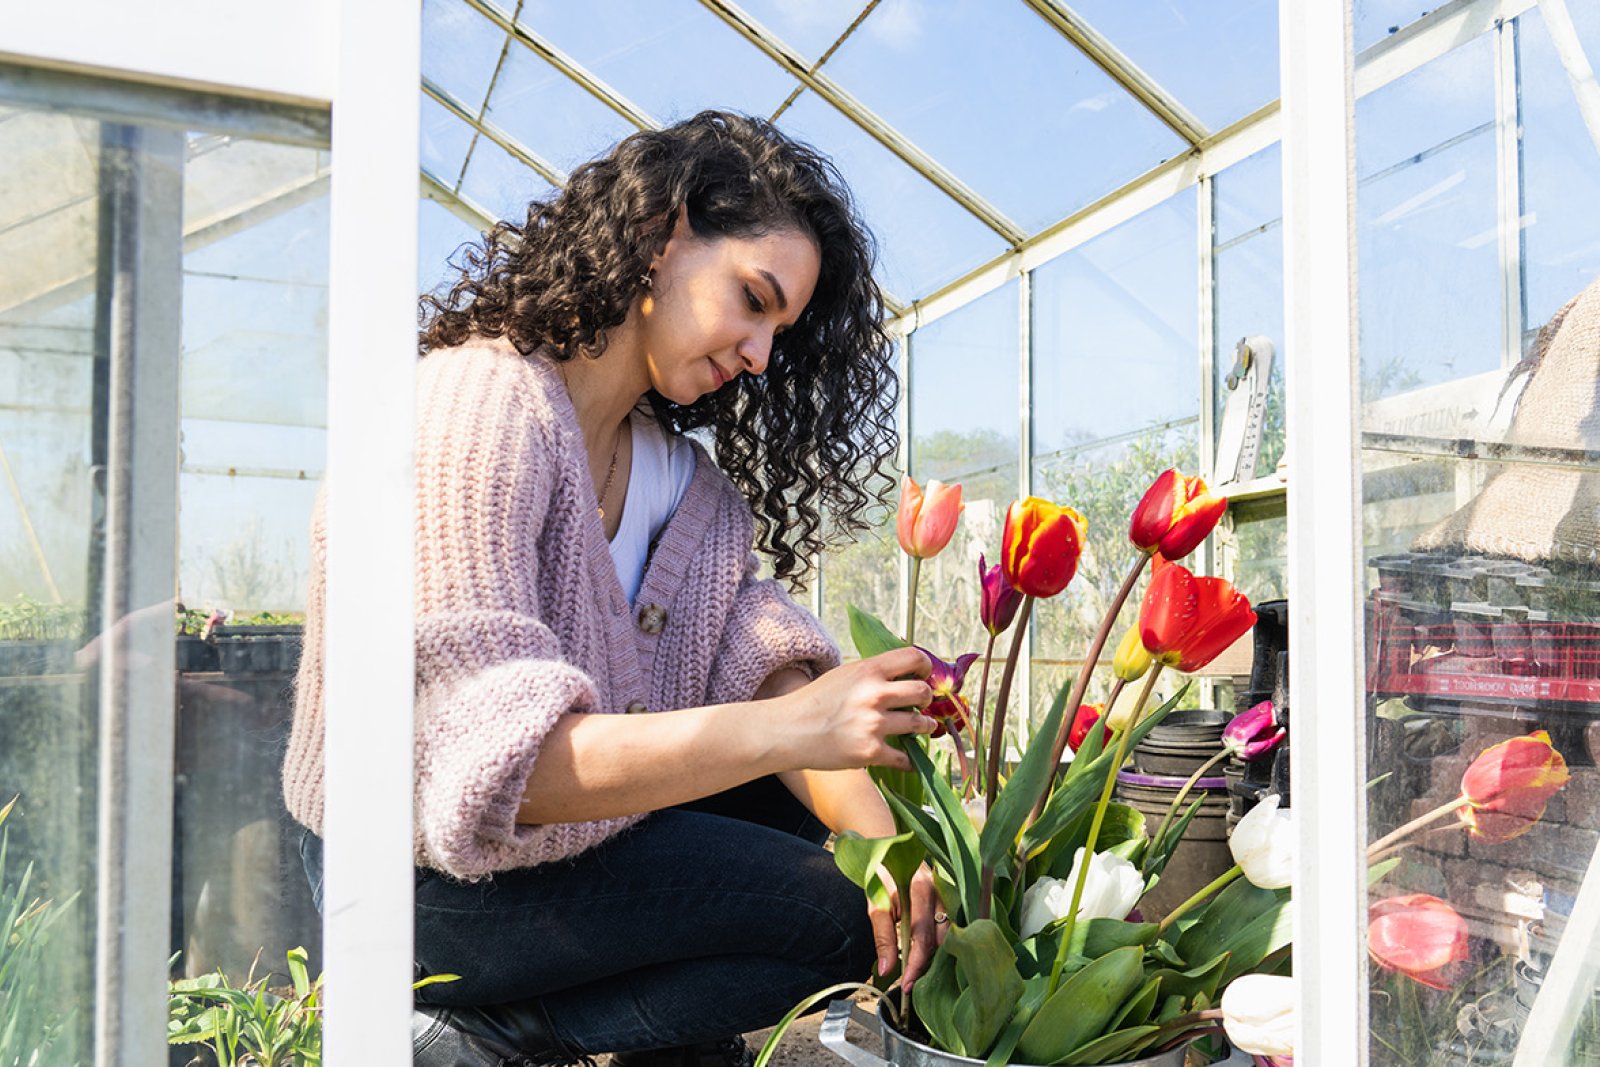 Lady in greenhouse puts tulips in bucket